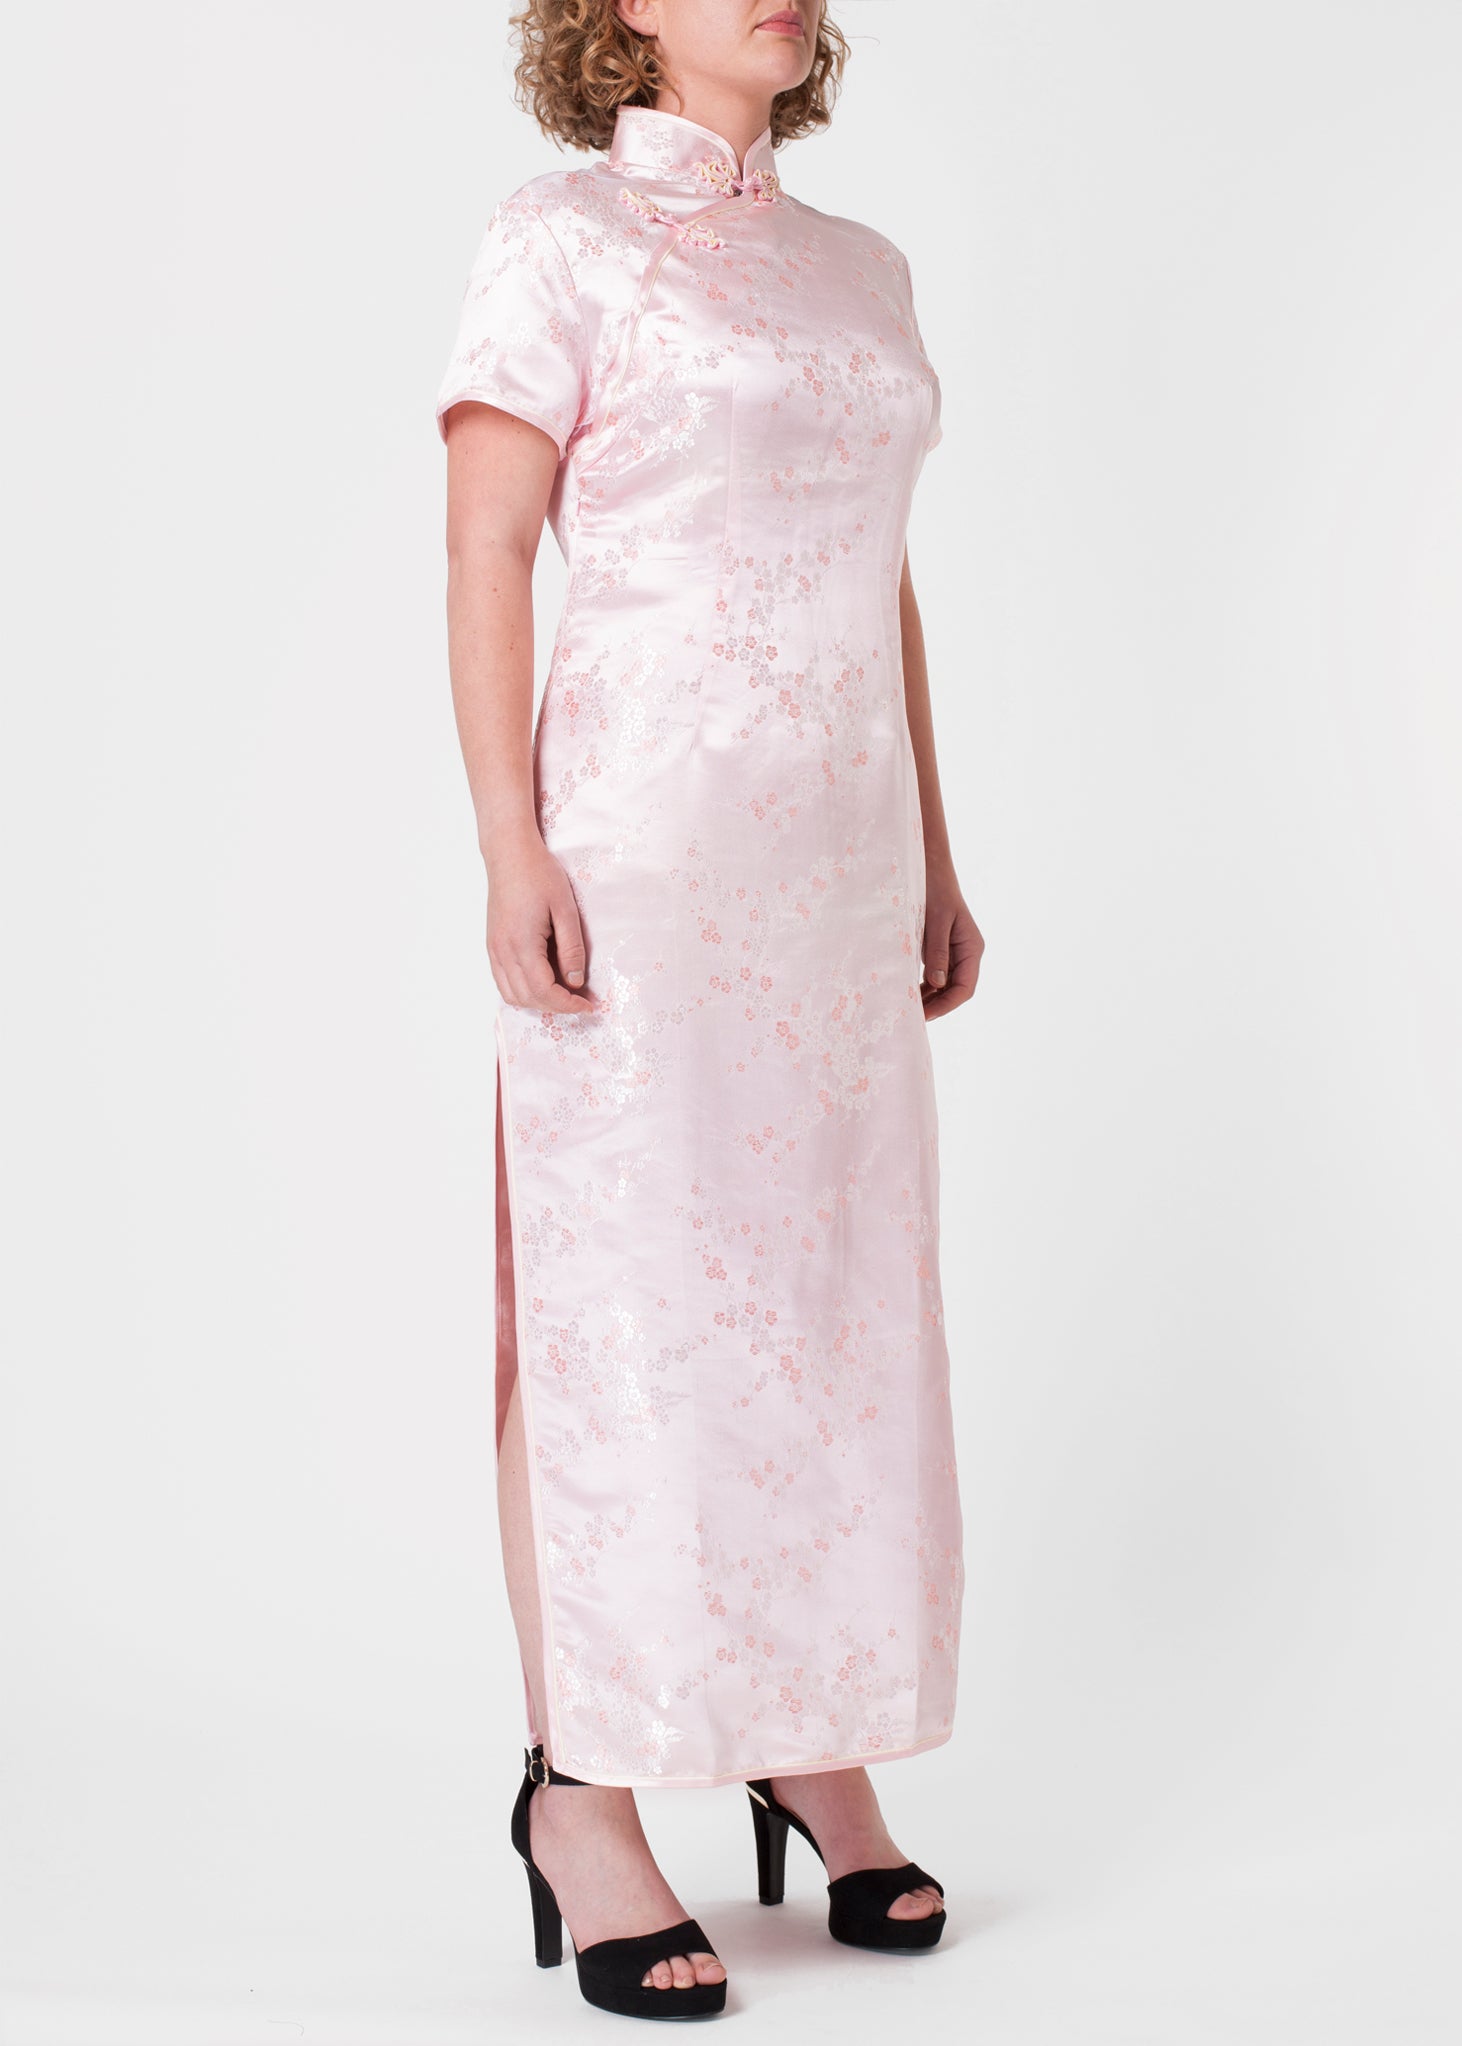 The Cheongsam or Qipao, is a feminine body-hugging dress with distinctive Chinese features of mandarin collar, side splits and hand stitched flower and knot frog fastenings. Manufactured in authentic high quality silk/rayon brocade in a beautiful subtle pink cherry blossom design - a symbol of female beauty and love